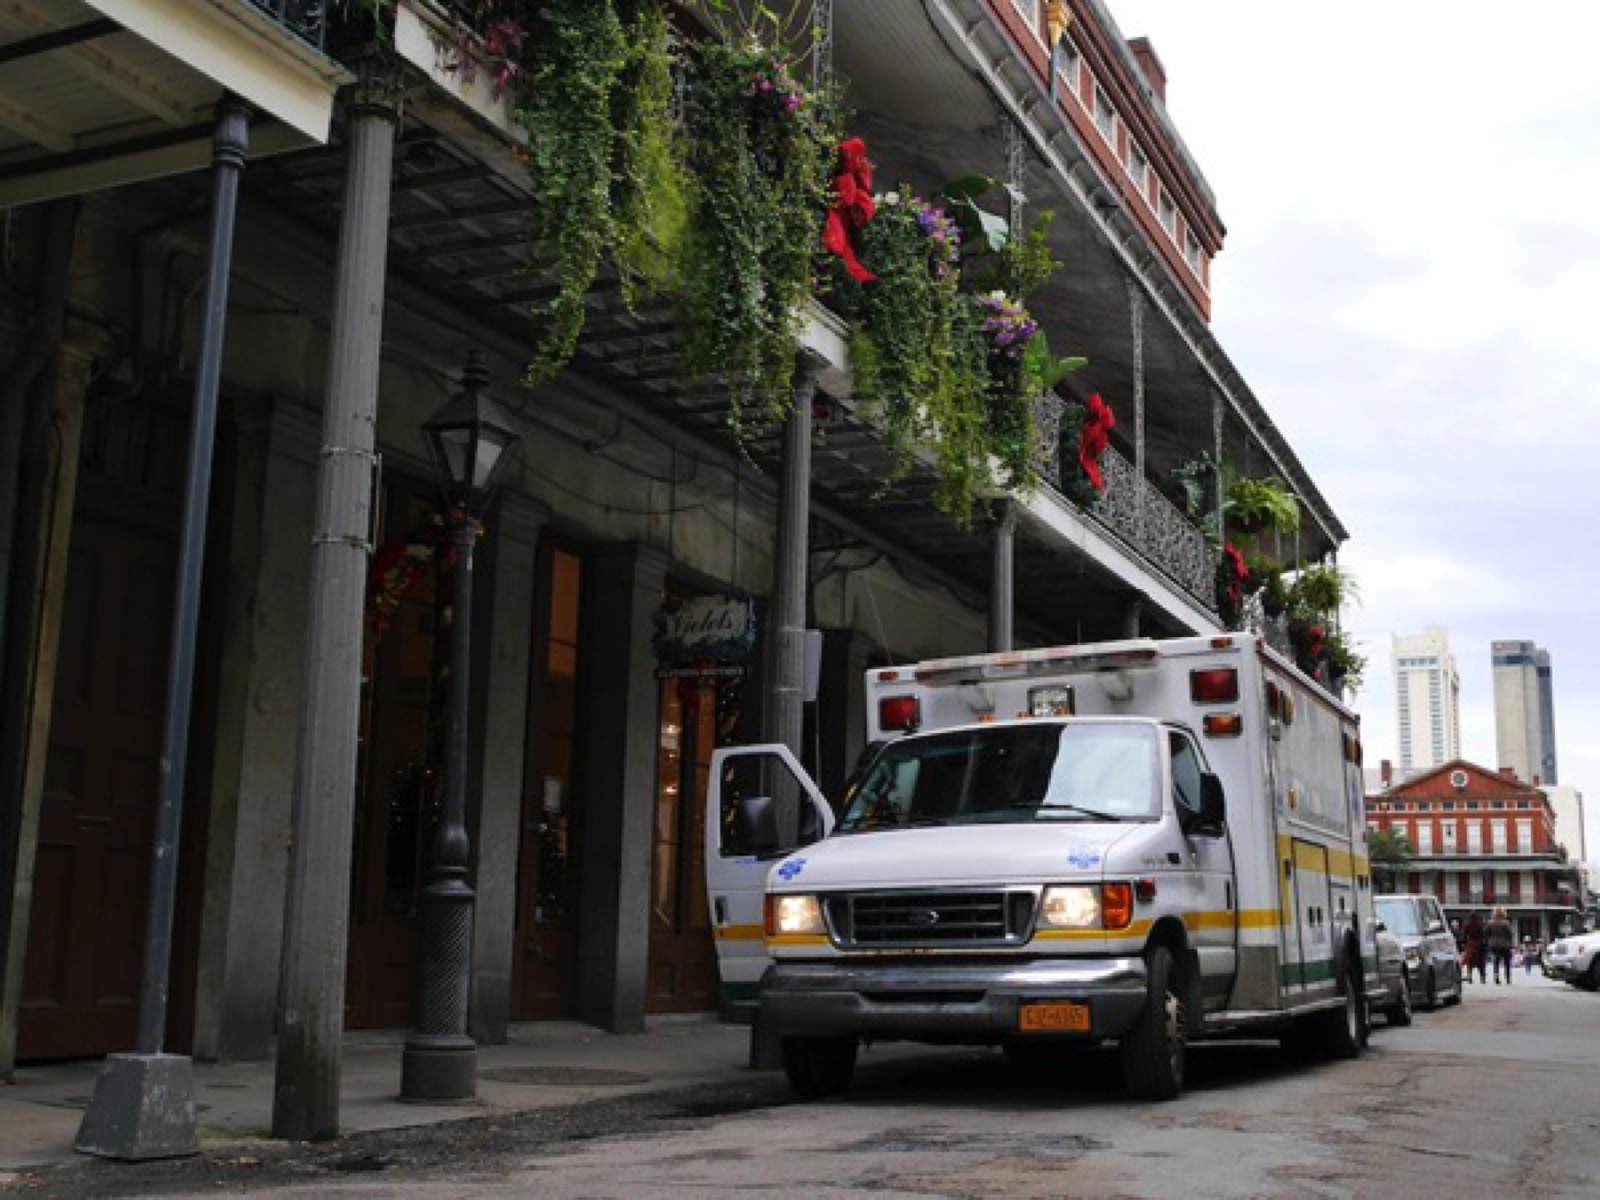 Ambulance in new orleans